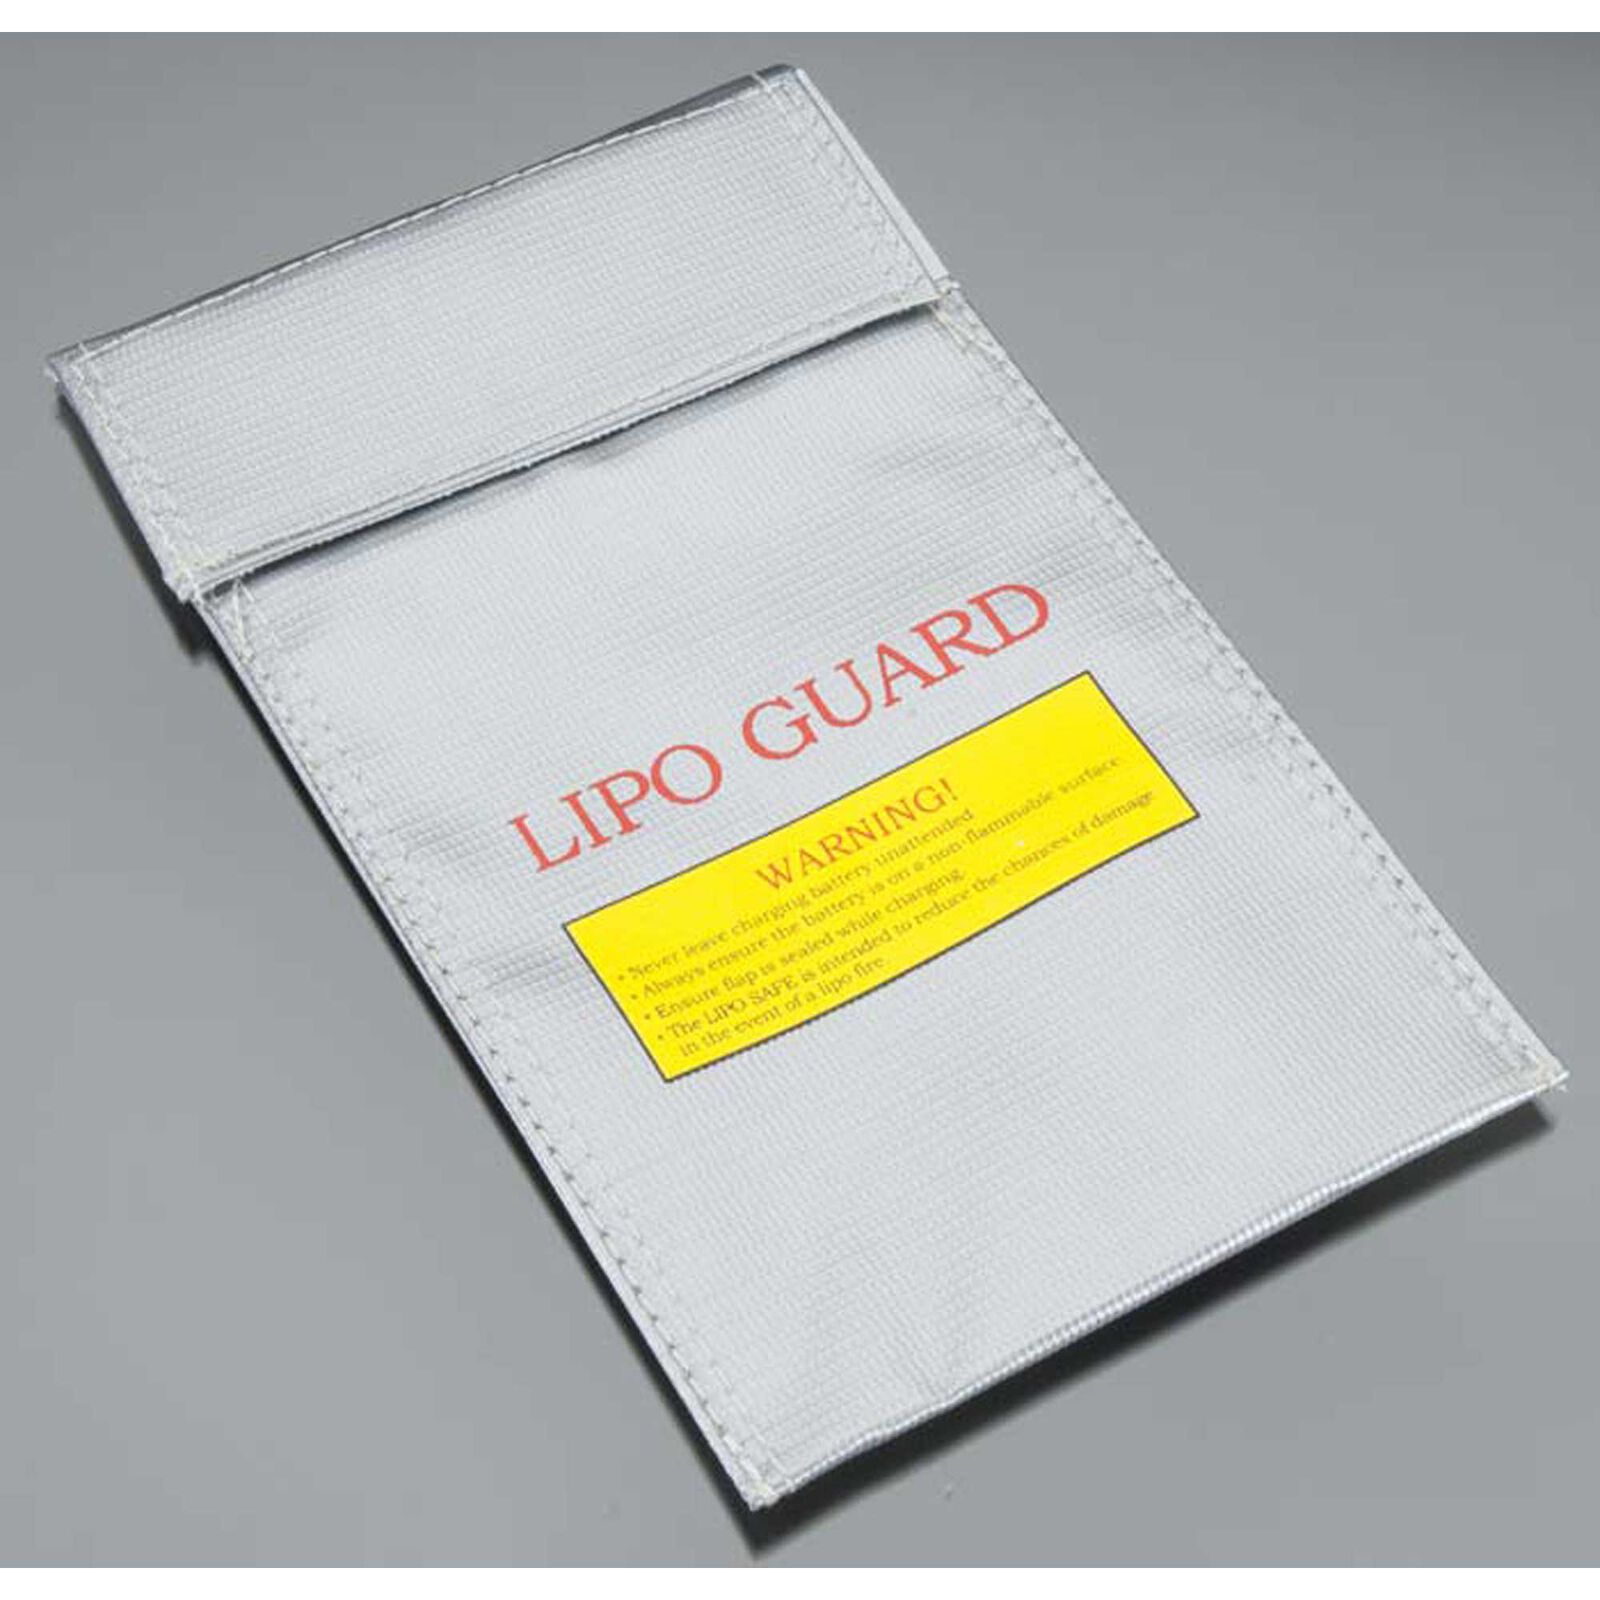 LiPo Guard Safety Battery Bag for Charging Storgage